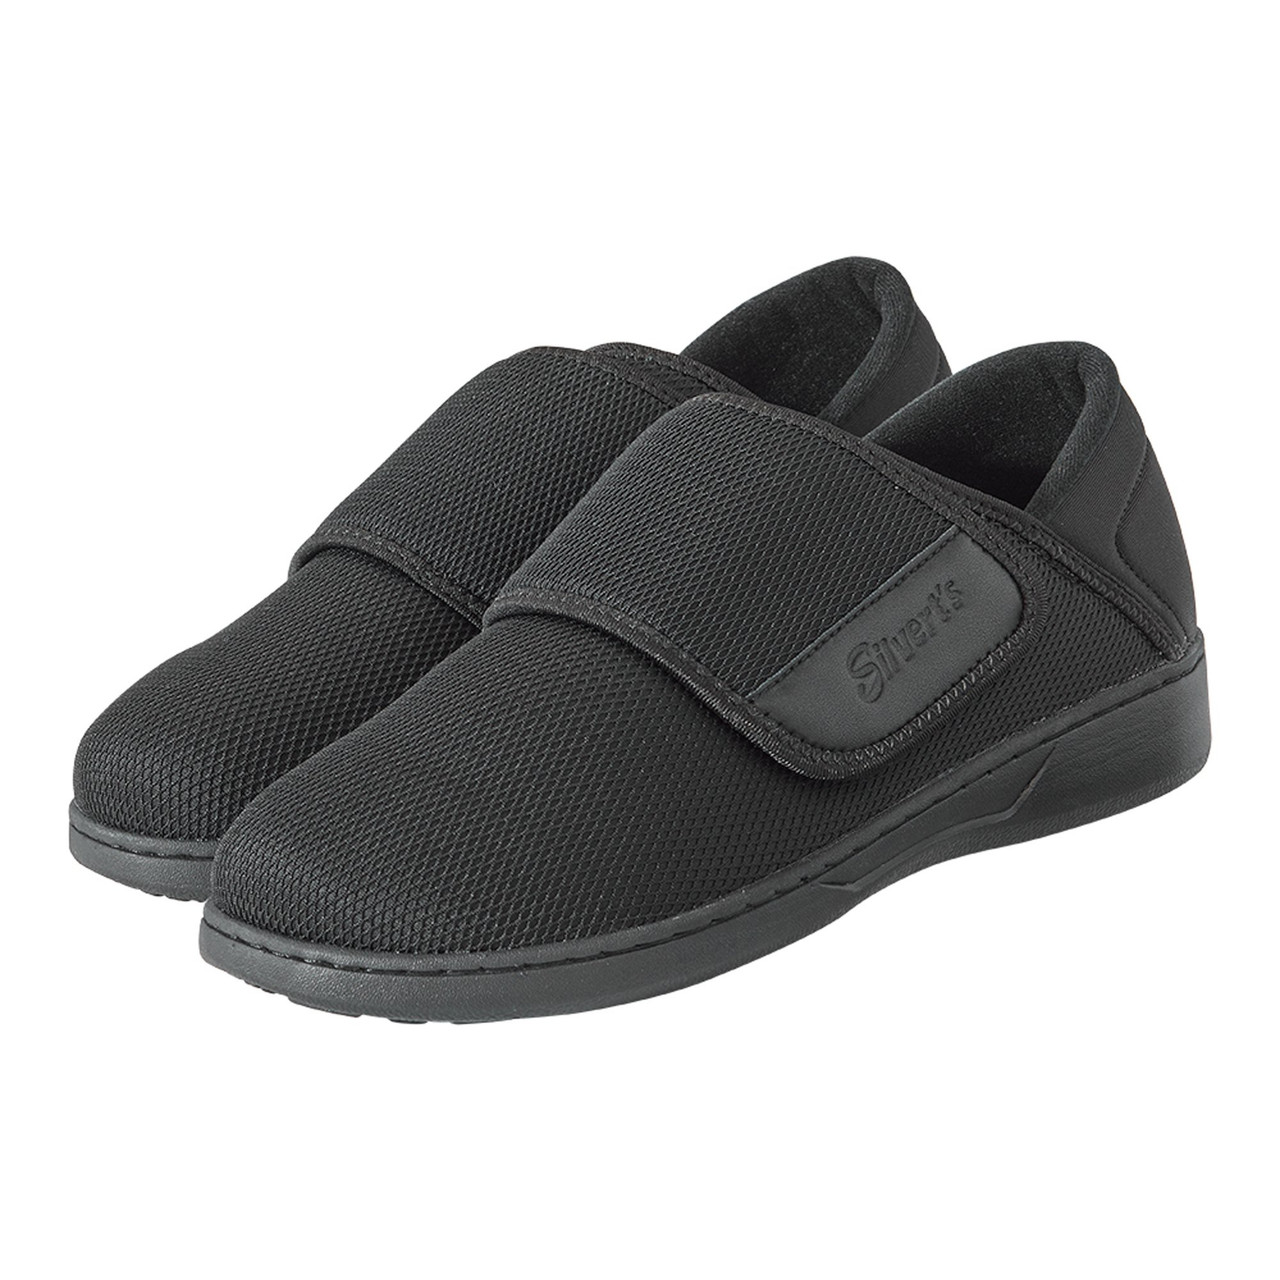 Ritual Modsigelse Spytte Silverts Comfort Steps Adaptive Shoes for Men - Extra Wide, Easy-On -  Simply Medical